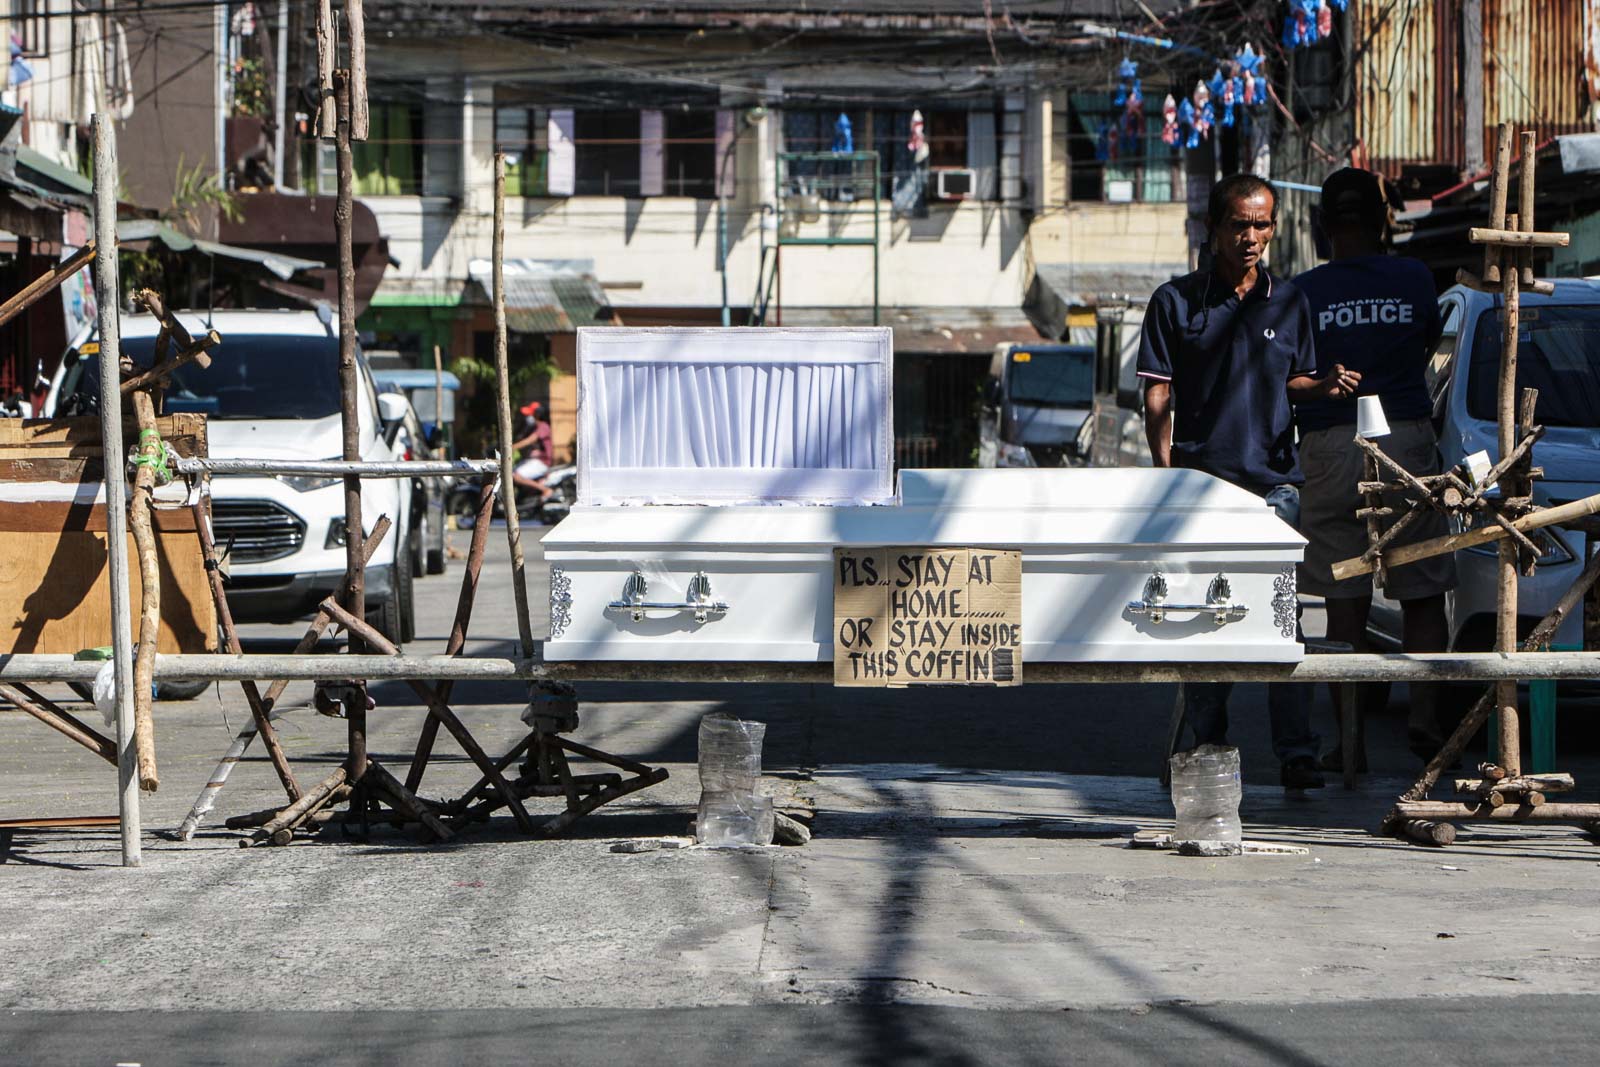 STAY HOME. Officers of Brgy. 436 in Sampaloc, Manila on April 3, 2020, set up a checkpoint with a coffin on display bearing a sign, 'Stay Home or Stay Inside this Coffin' serving as a stern warning to residents during the implementation of the enhanced community quarantine. Photo by Ben Nabong/Rappler  